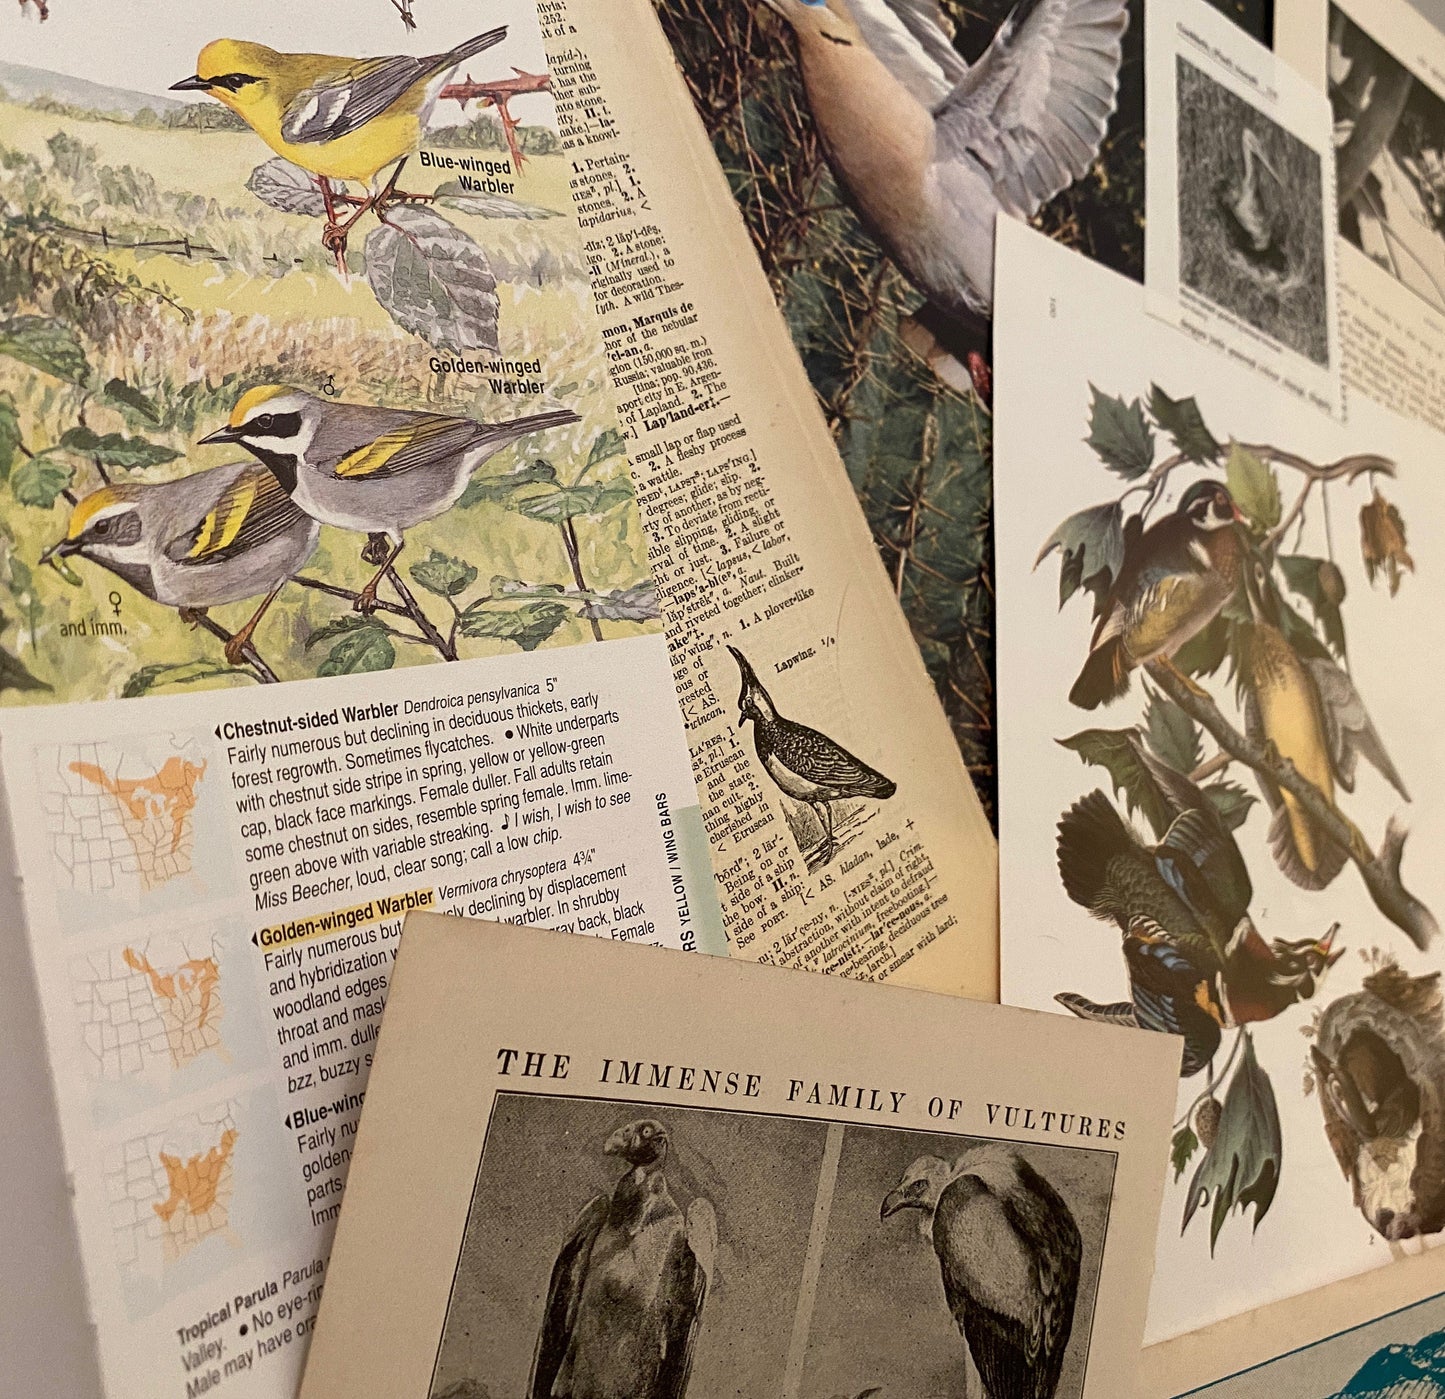 Papers for repurposing: 1/8 lb mix of vintage bird pages and prints